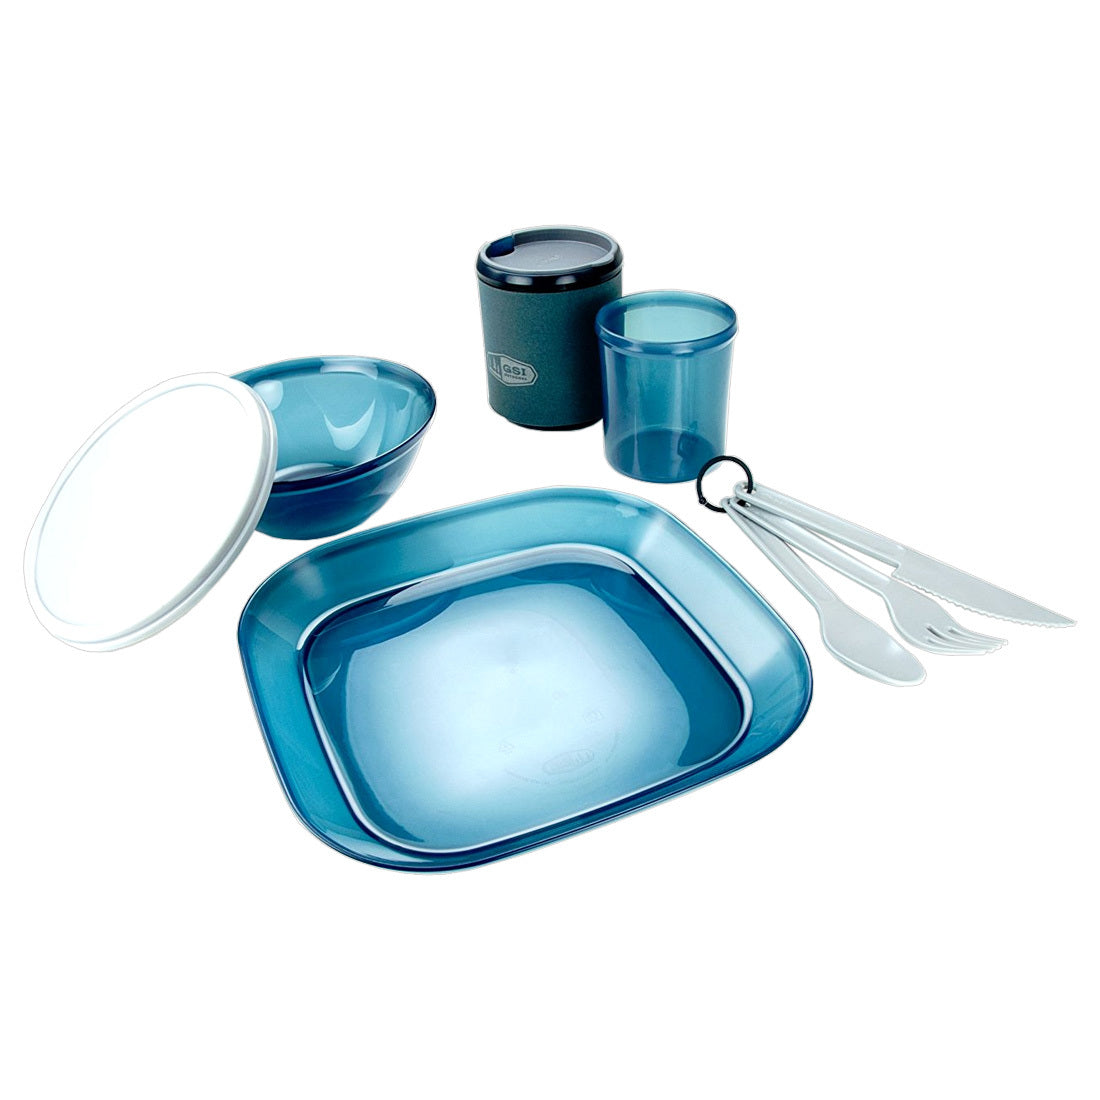 GSI Outdoors Infinity Tableset